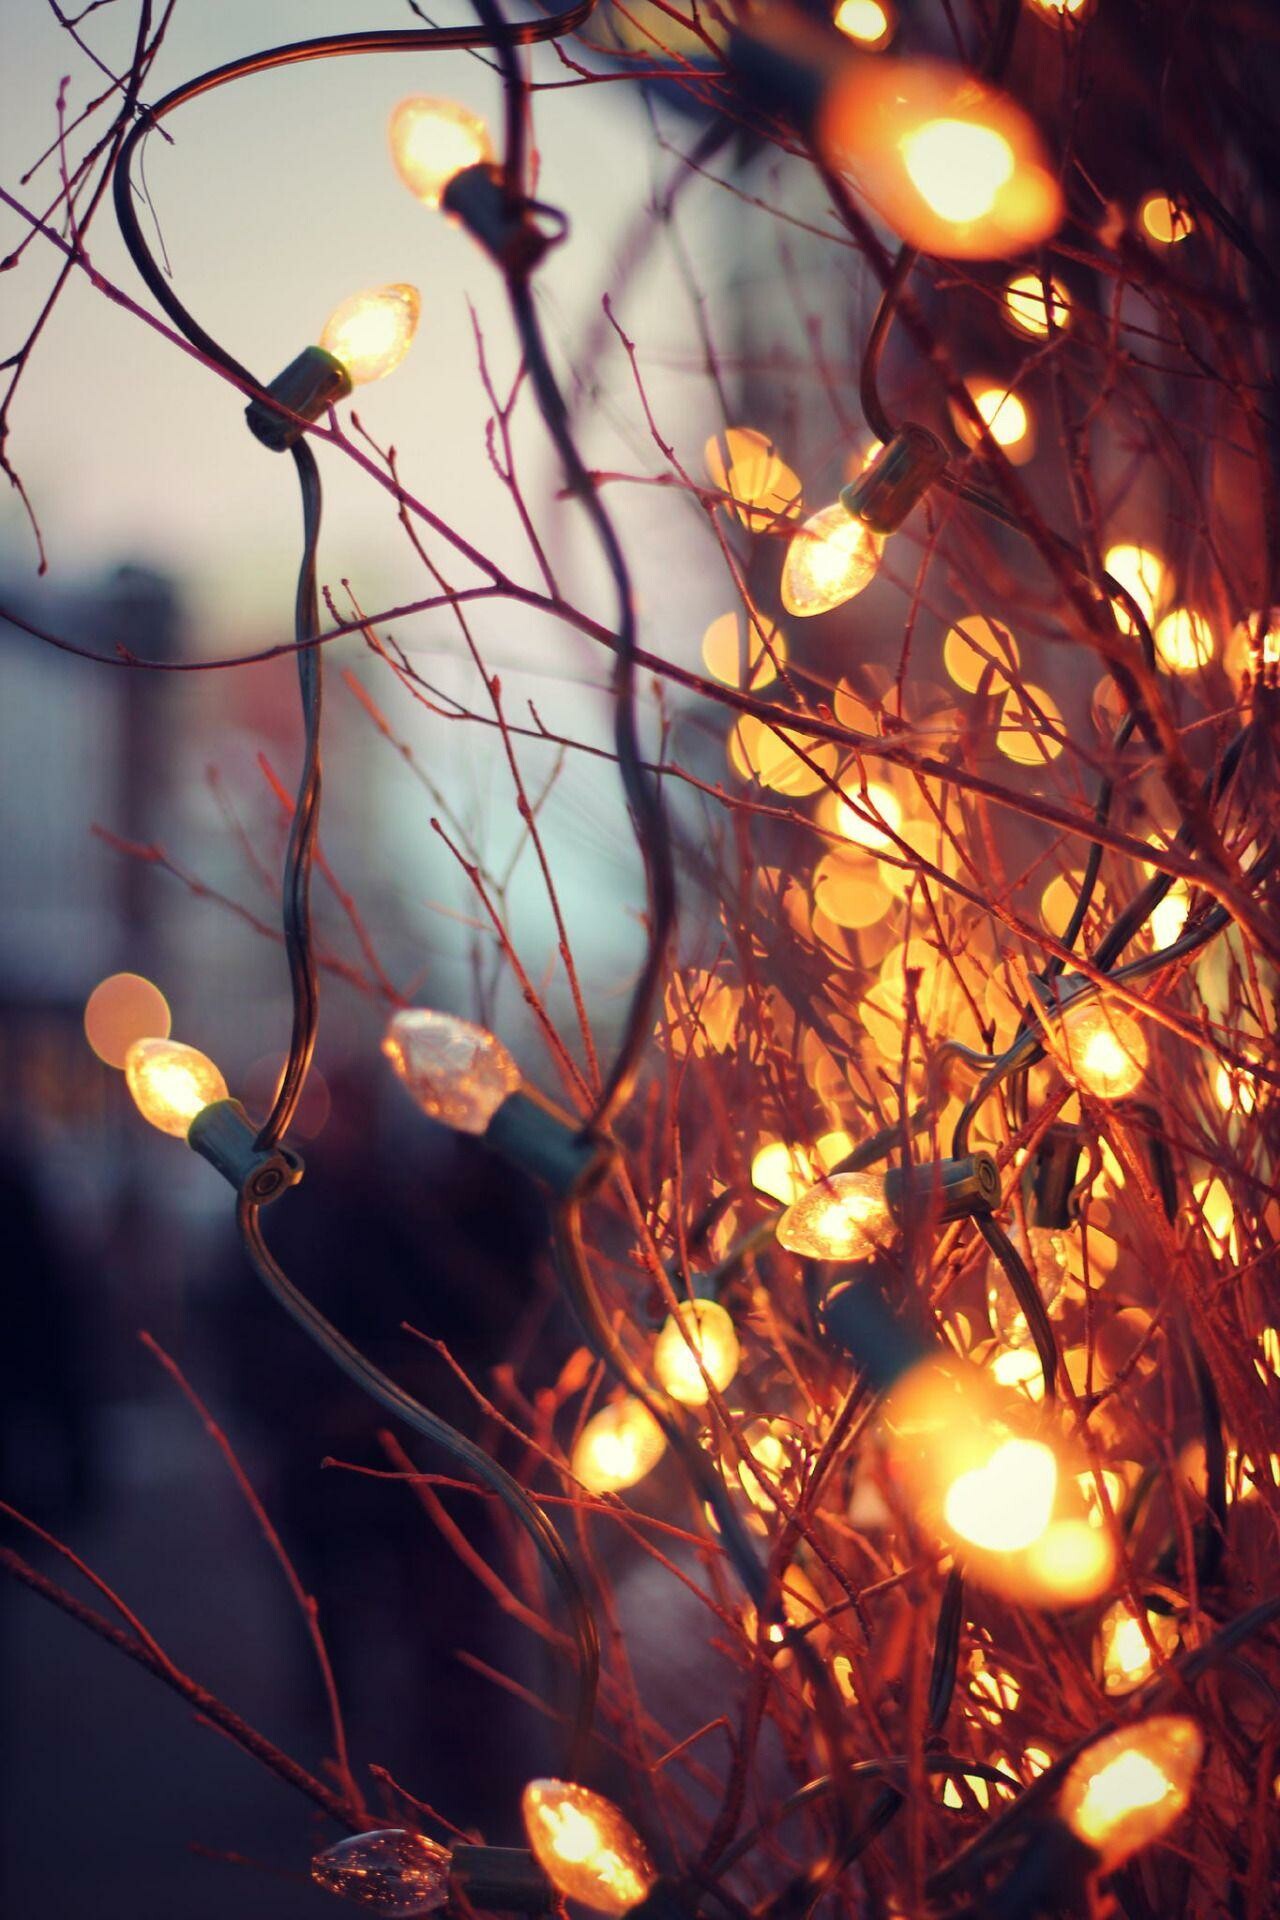 Fairy Lights: The custom goes back to when trees were decorated with candles. 1280x1920 HD Background.